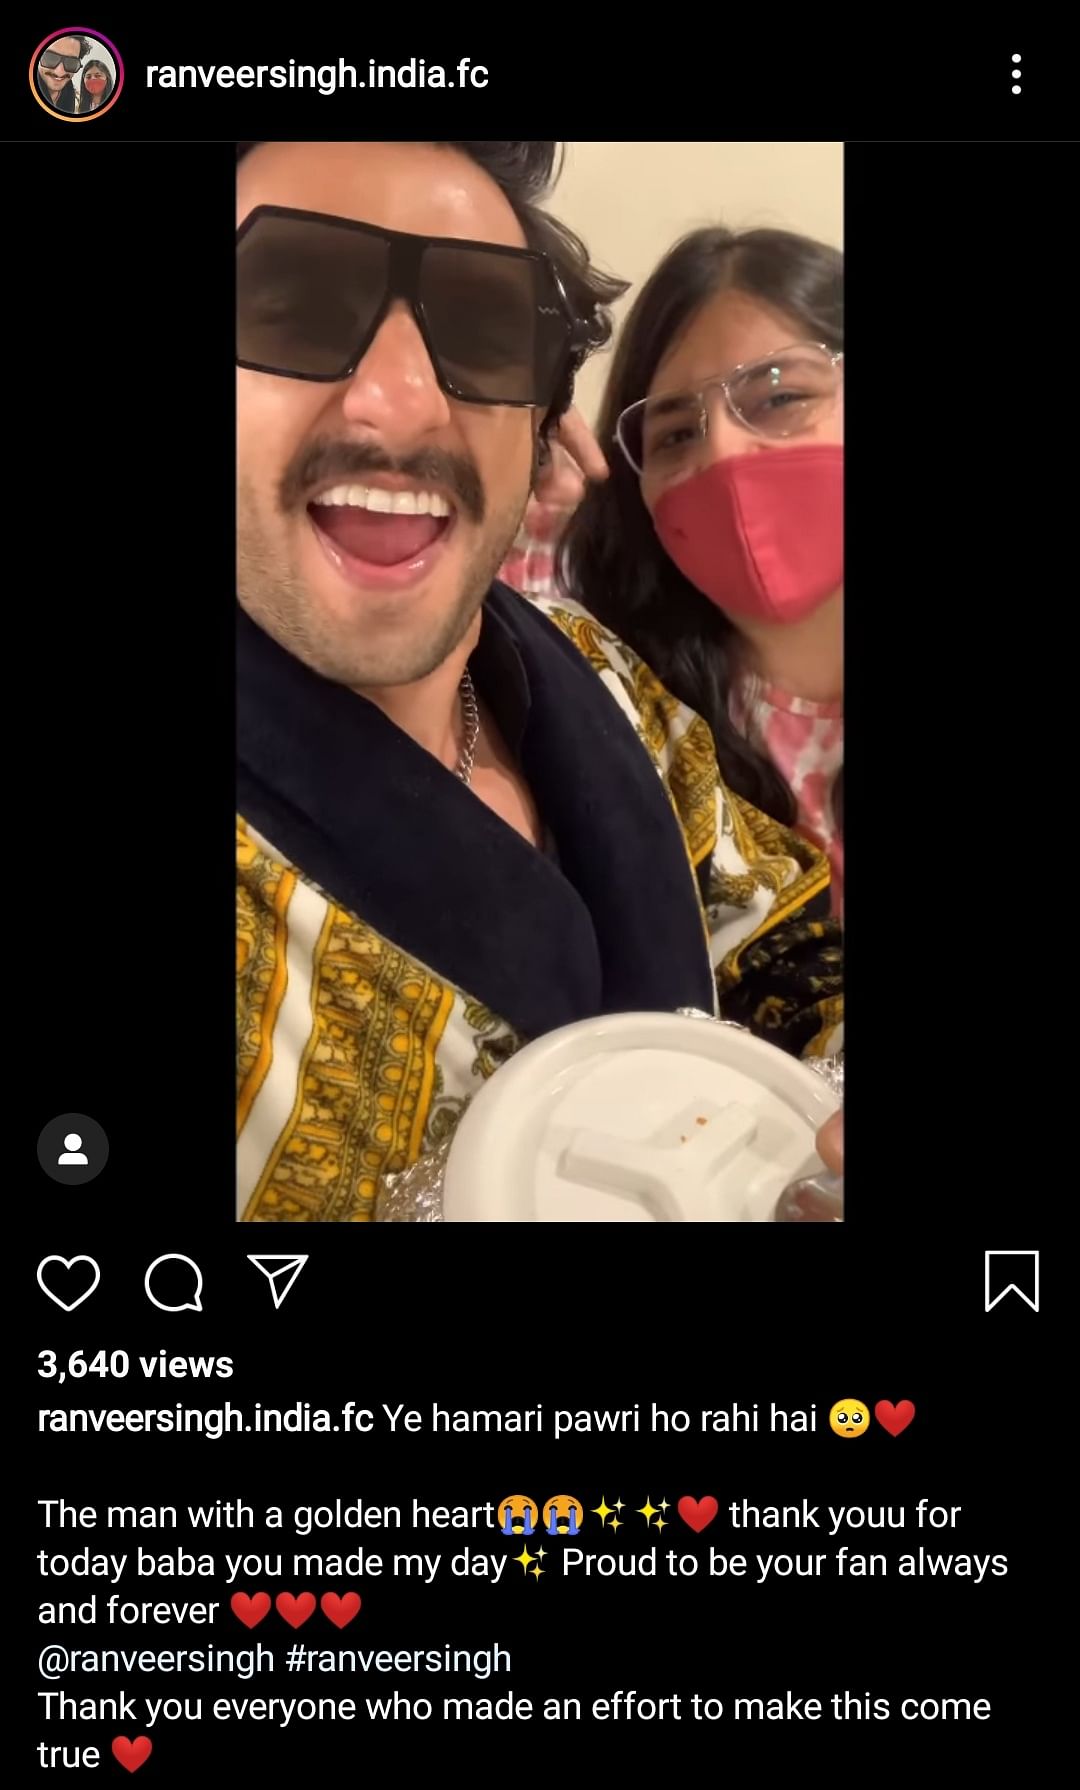 Ranveer Singh records hilarious video with a fan, on the 'pawri' trend.